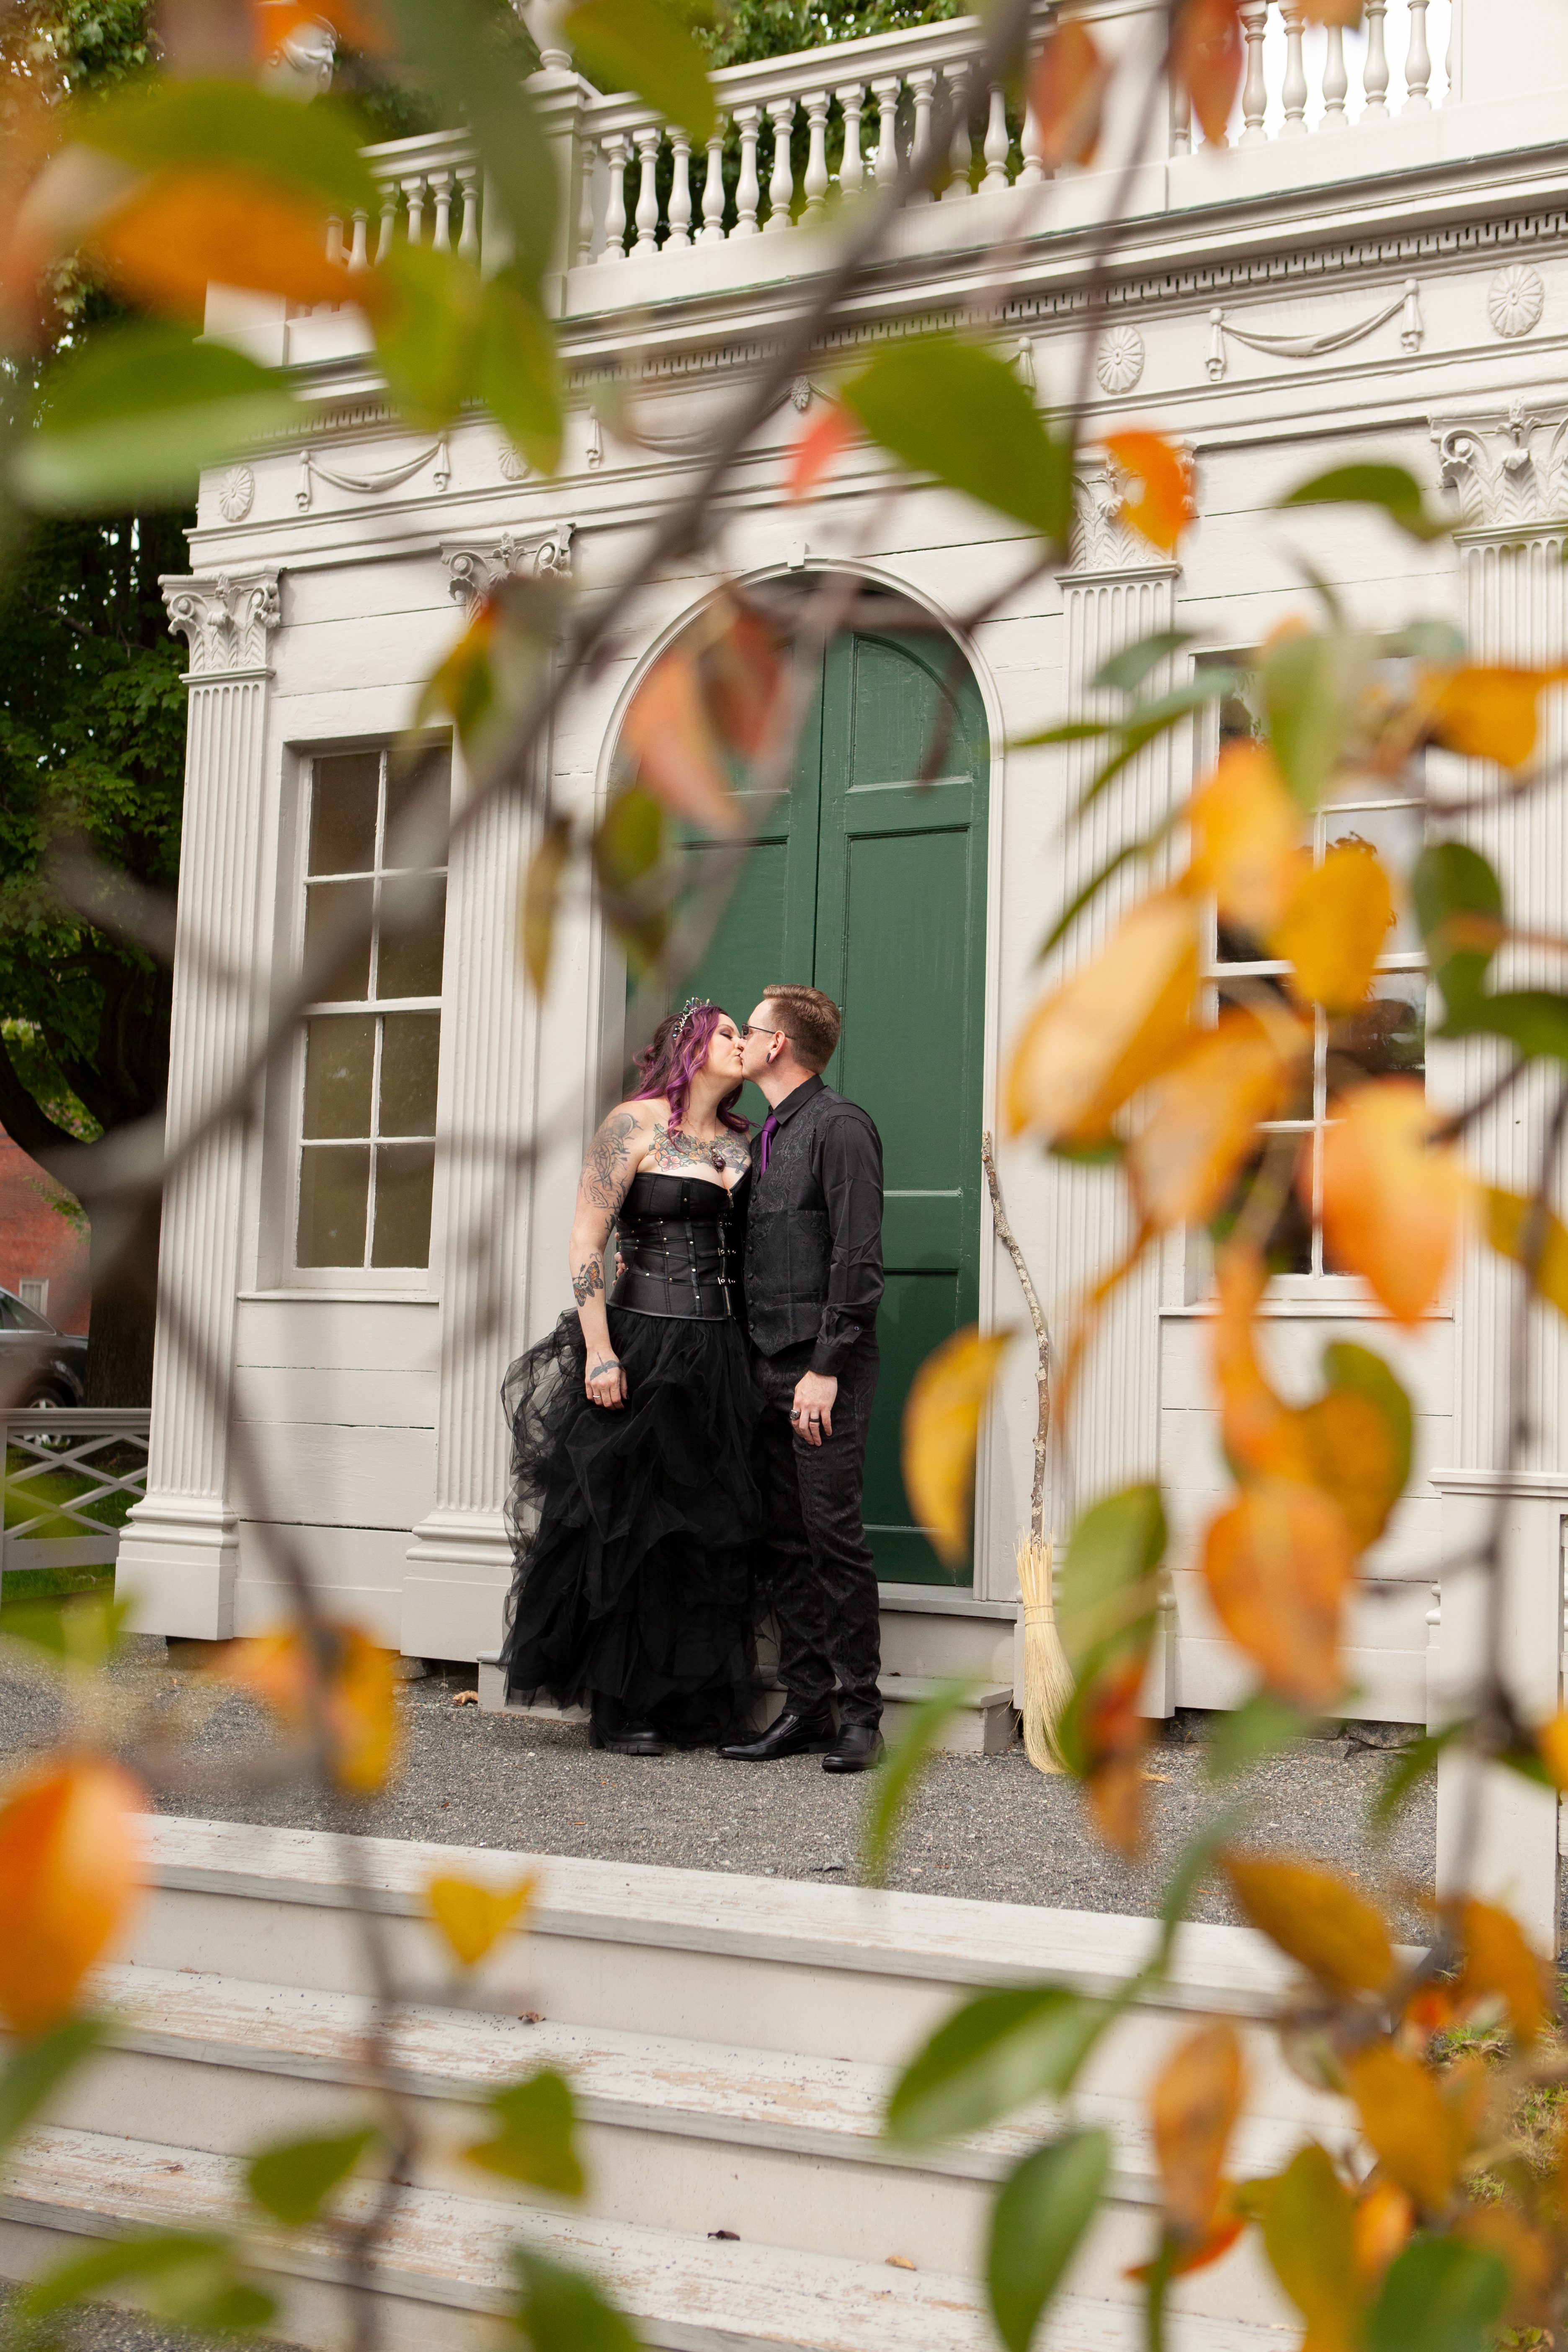 things to do in salem, salem ma wedding planning resources